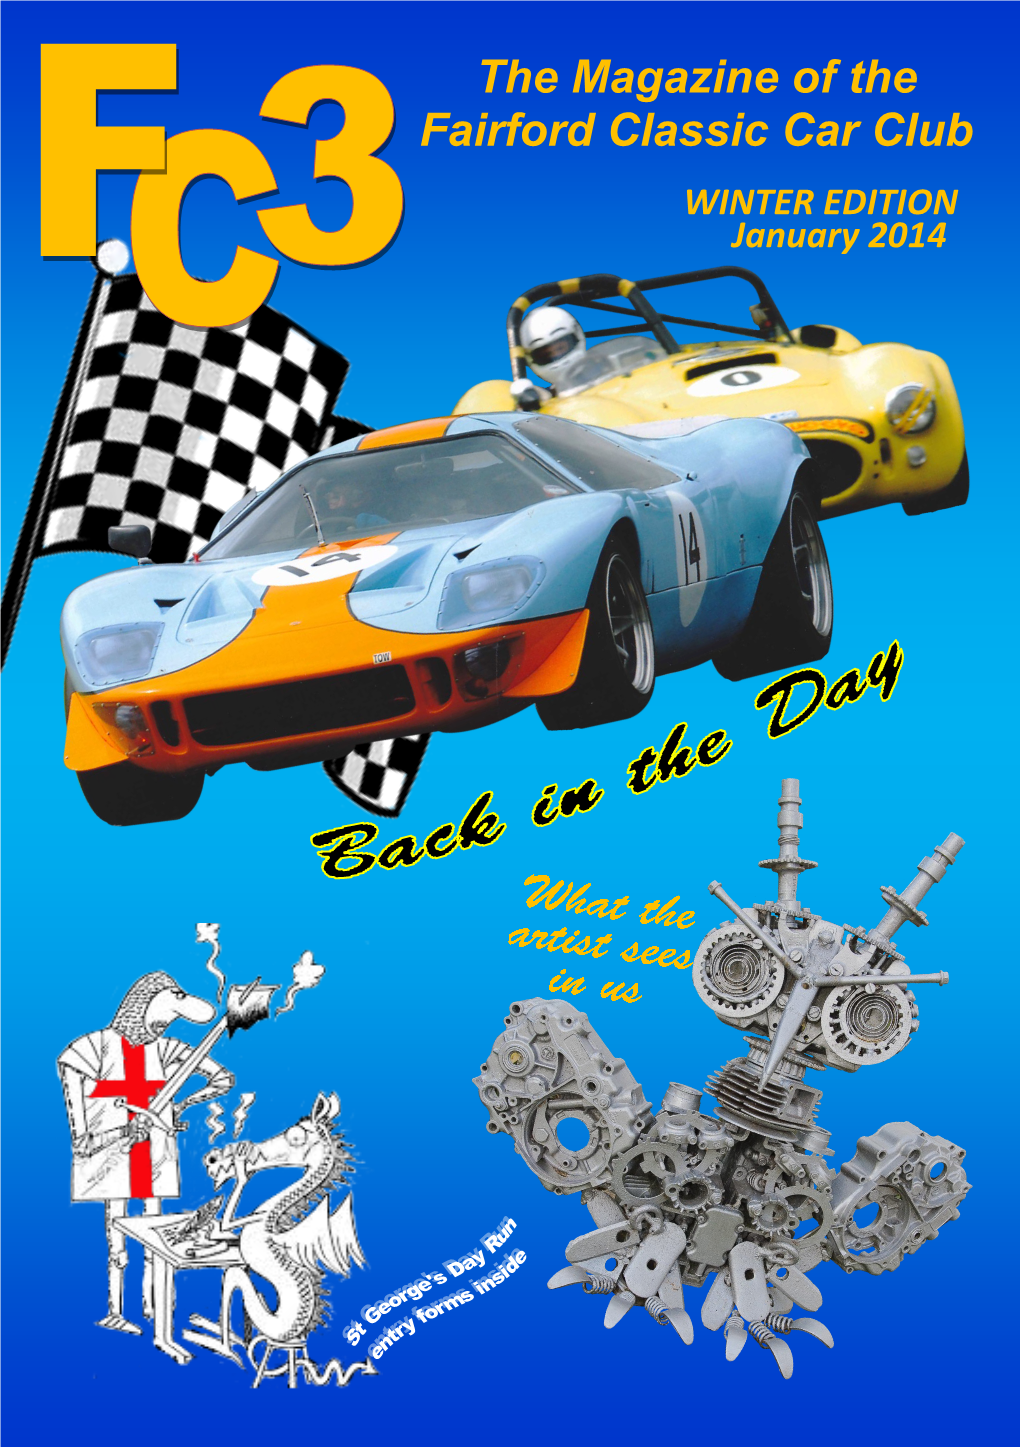 The Magazine of the Fairford Classic Car Club WINTER EDITION January 2014